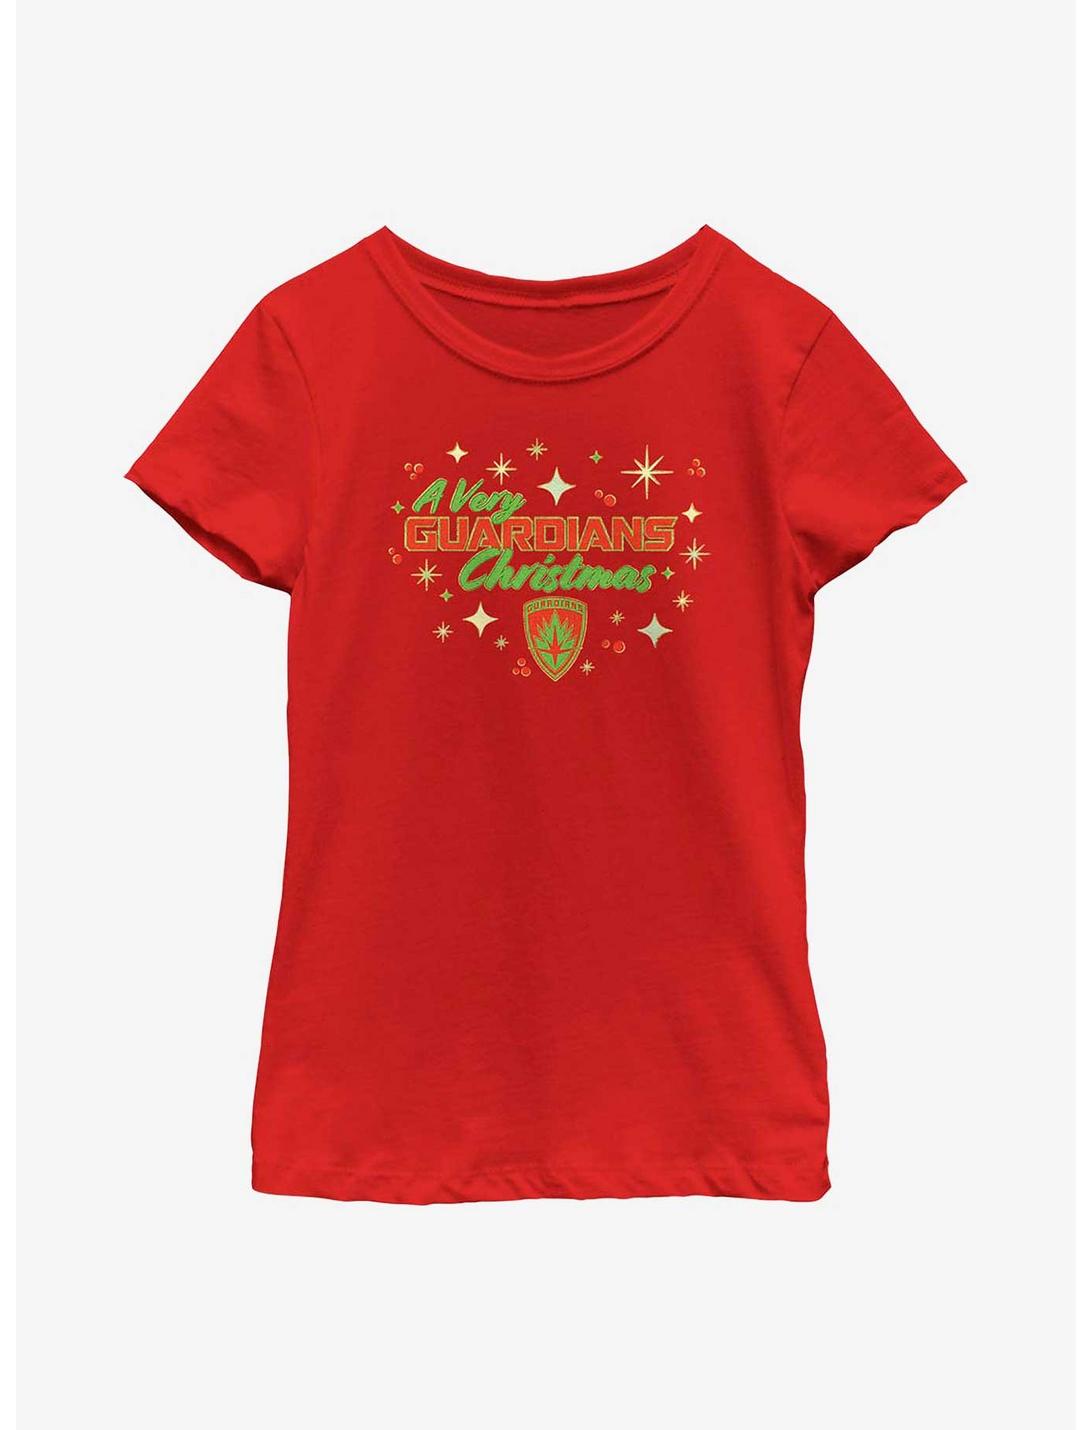 Marvel Guardians of the Galaxy Holiday Special A Very Guardians Christmas Youth Girls T-Shirt, RED, hi-res